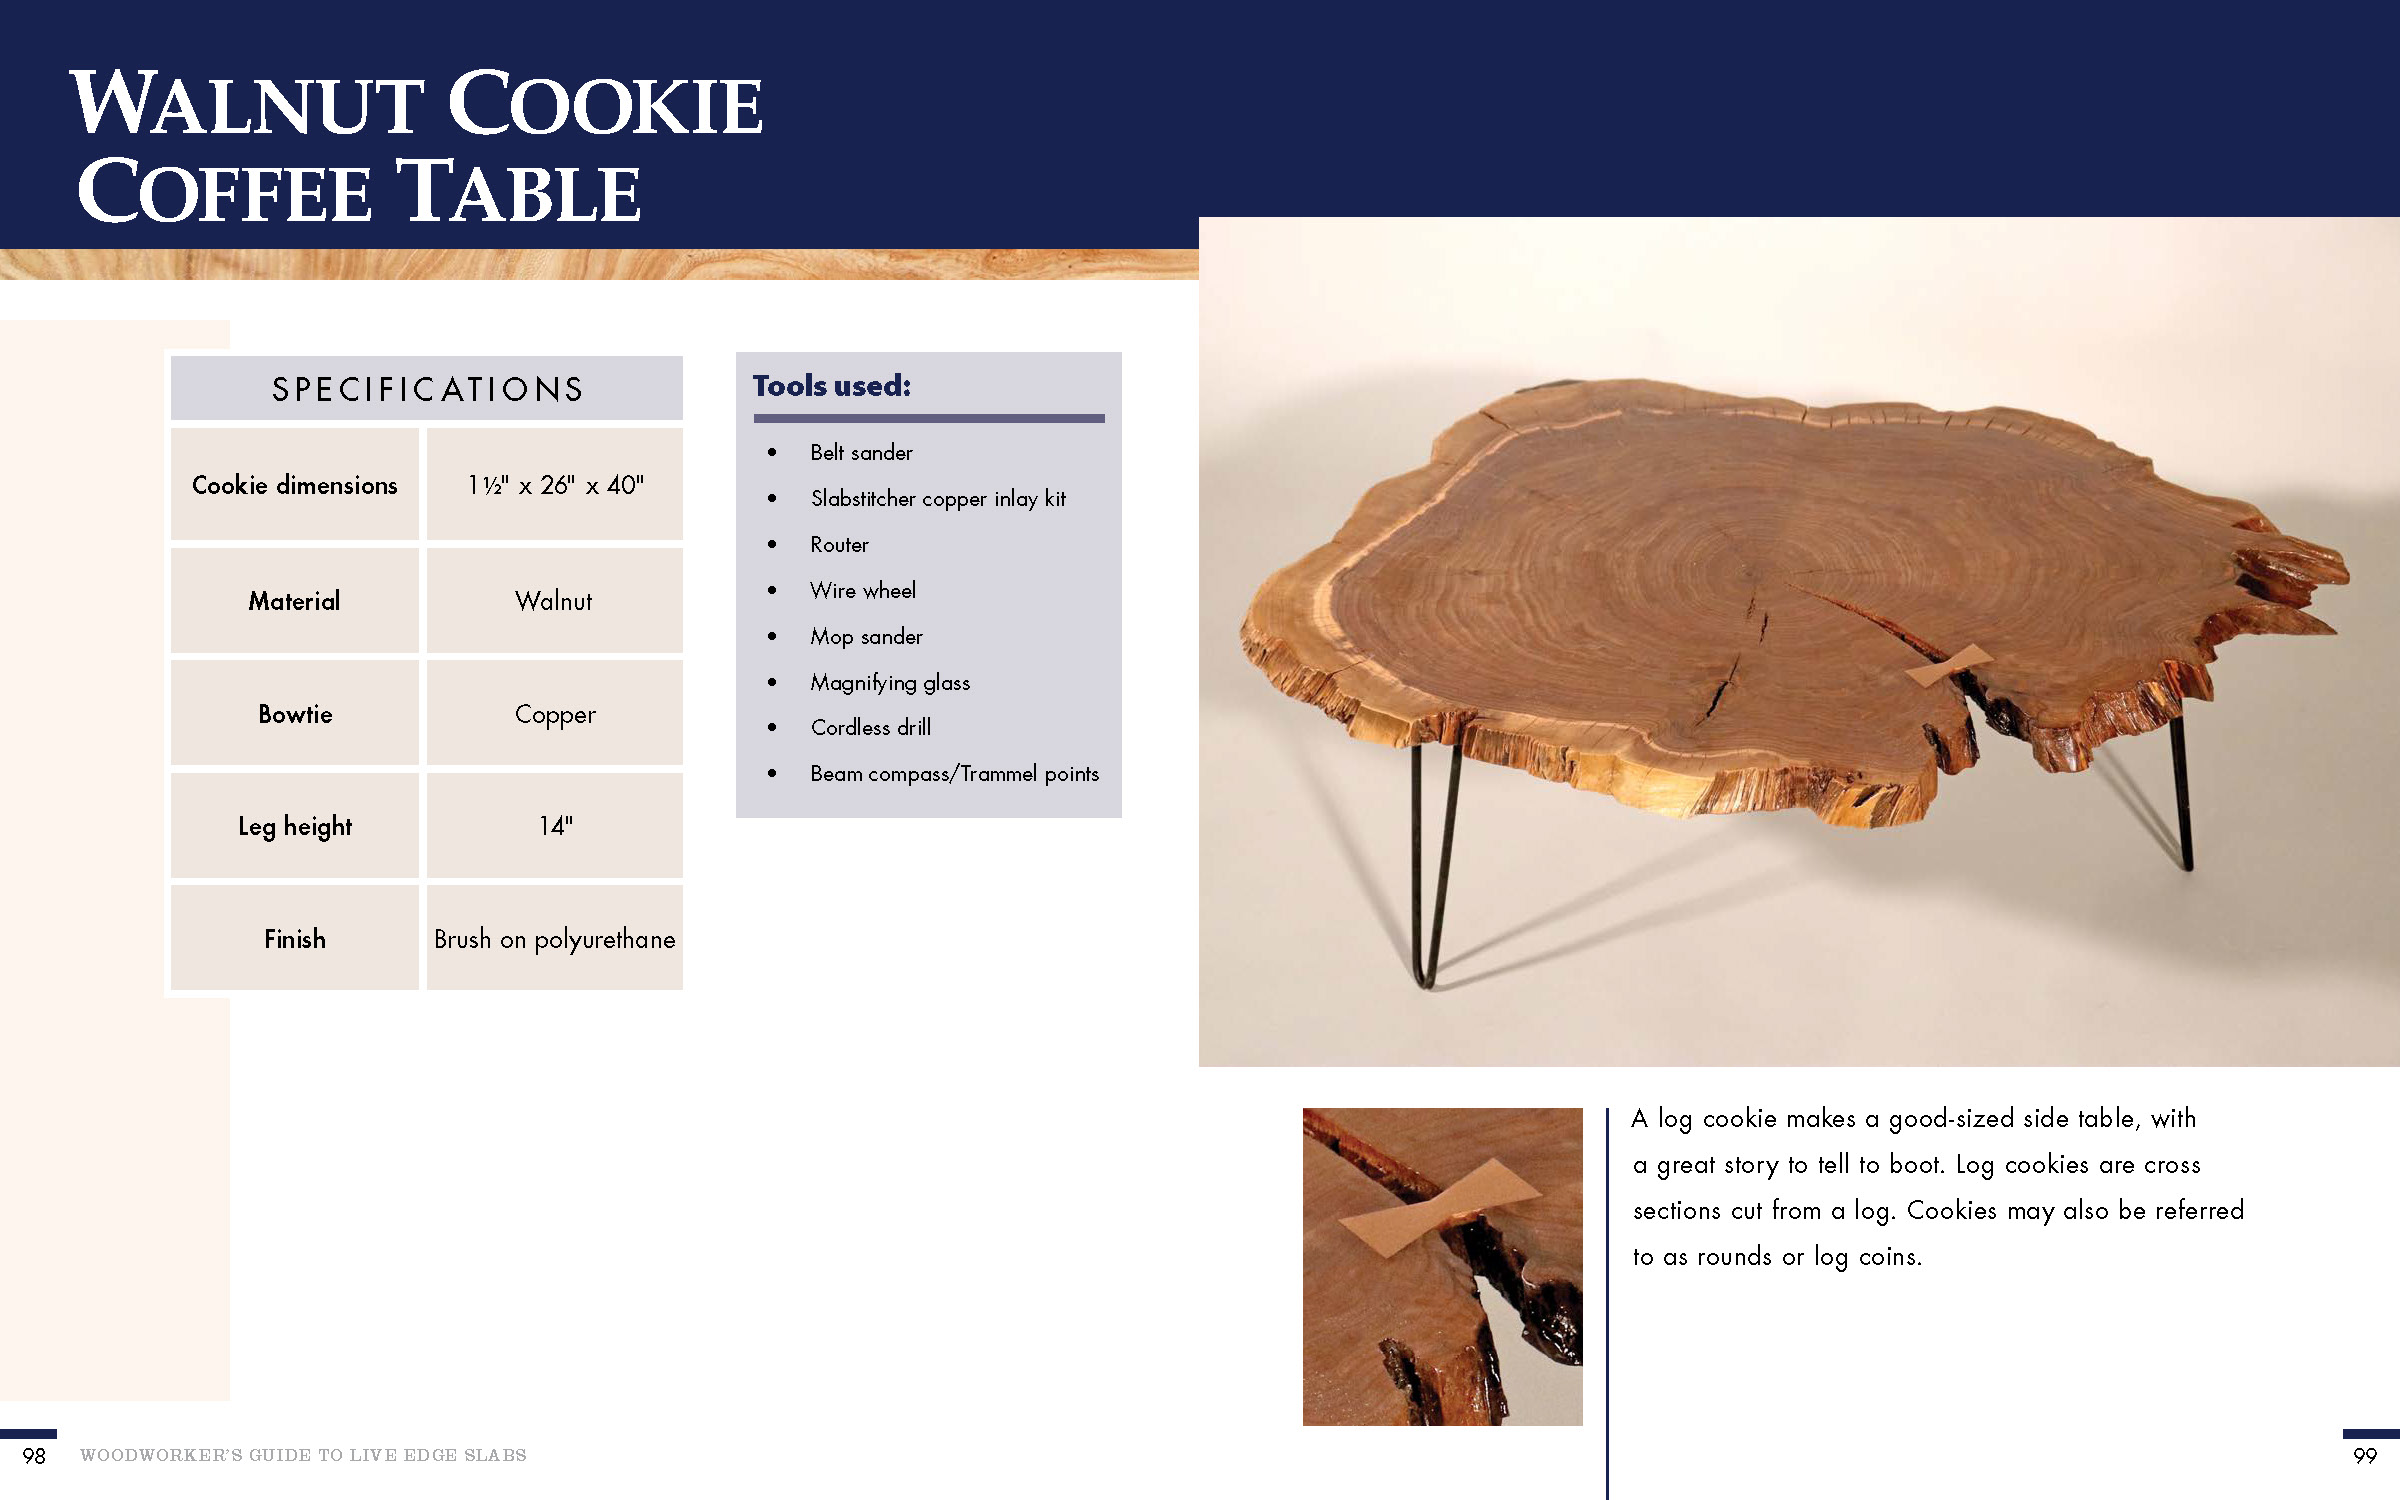 Walnut Cookie Coffee Table specifications and tools needed